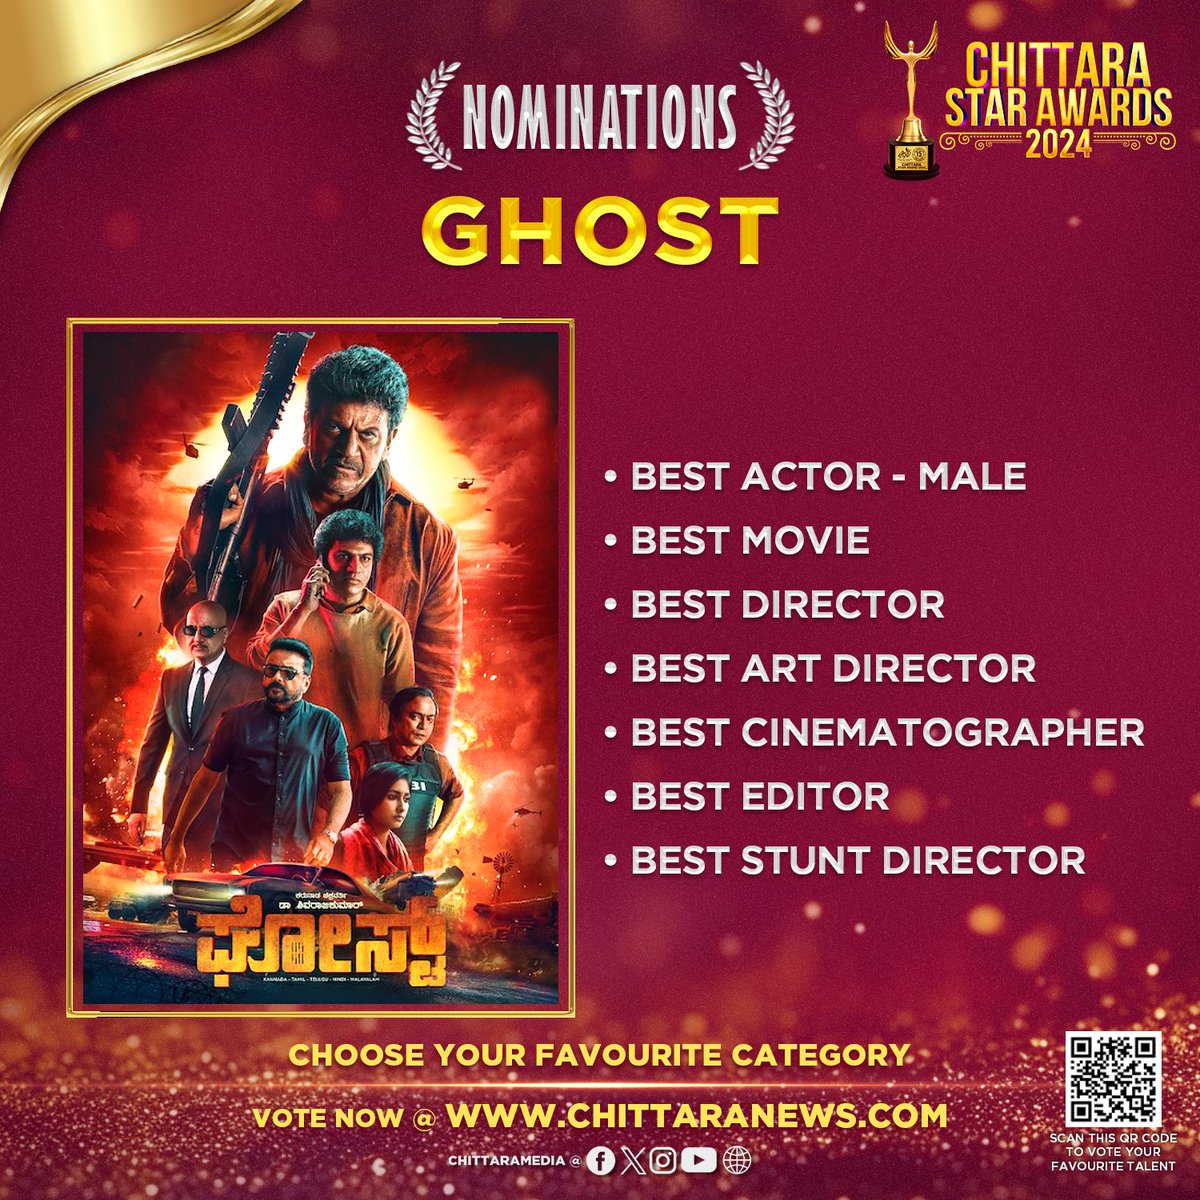 #Ghost 7 Nominations at #ChittaraStarAwards2024 Global Voting is Now Live : awards.chittaranews.com/poll/780/ Vote now and show your love for Team #Ghost #ChittaraStarAwards2024 #CSA2024